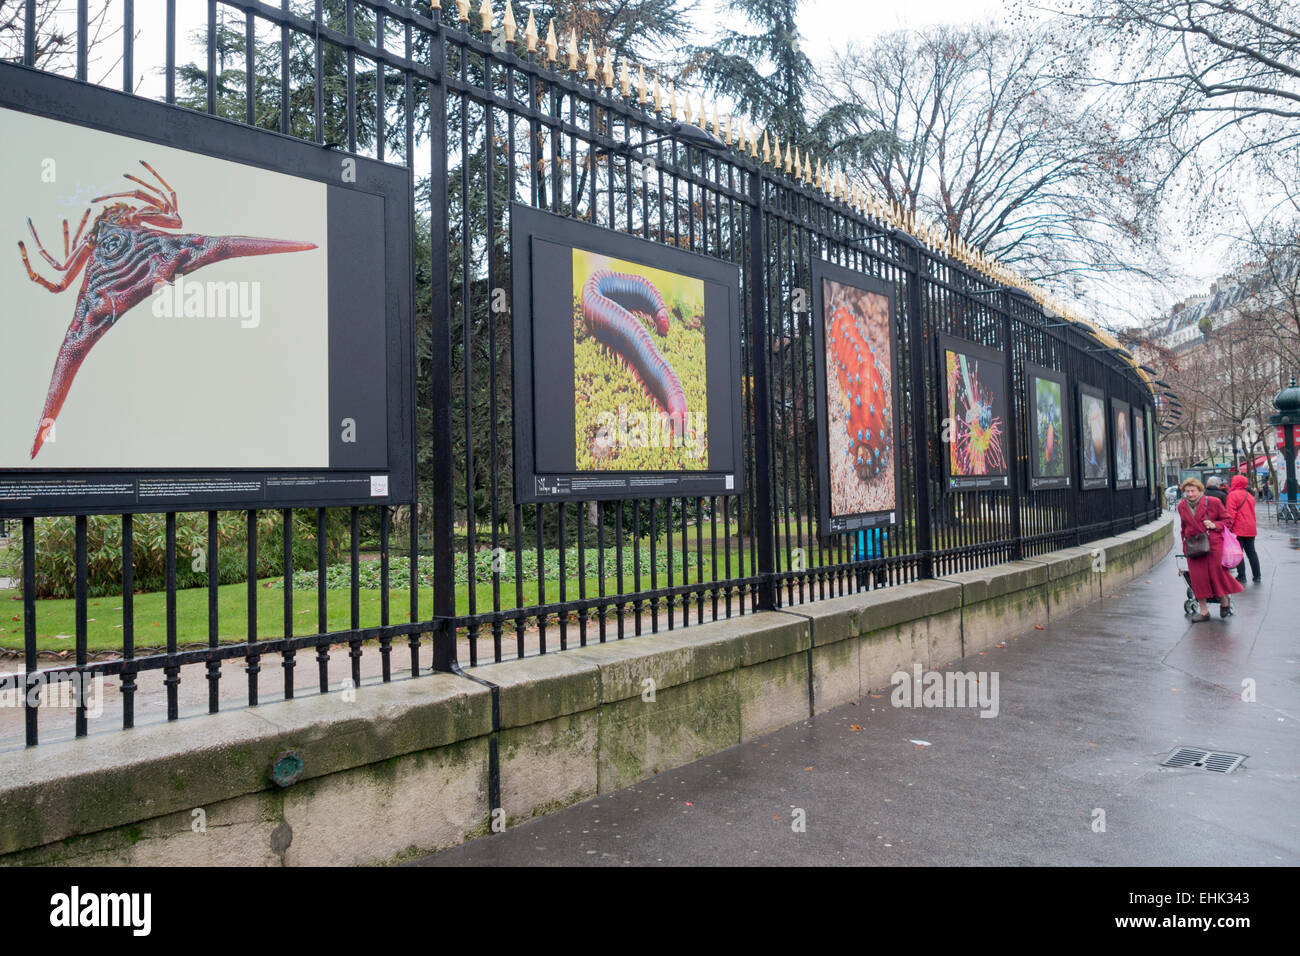 Photography exhibition on the iron railings of the Jardin du Luxembourg, Paris Stock Photo